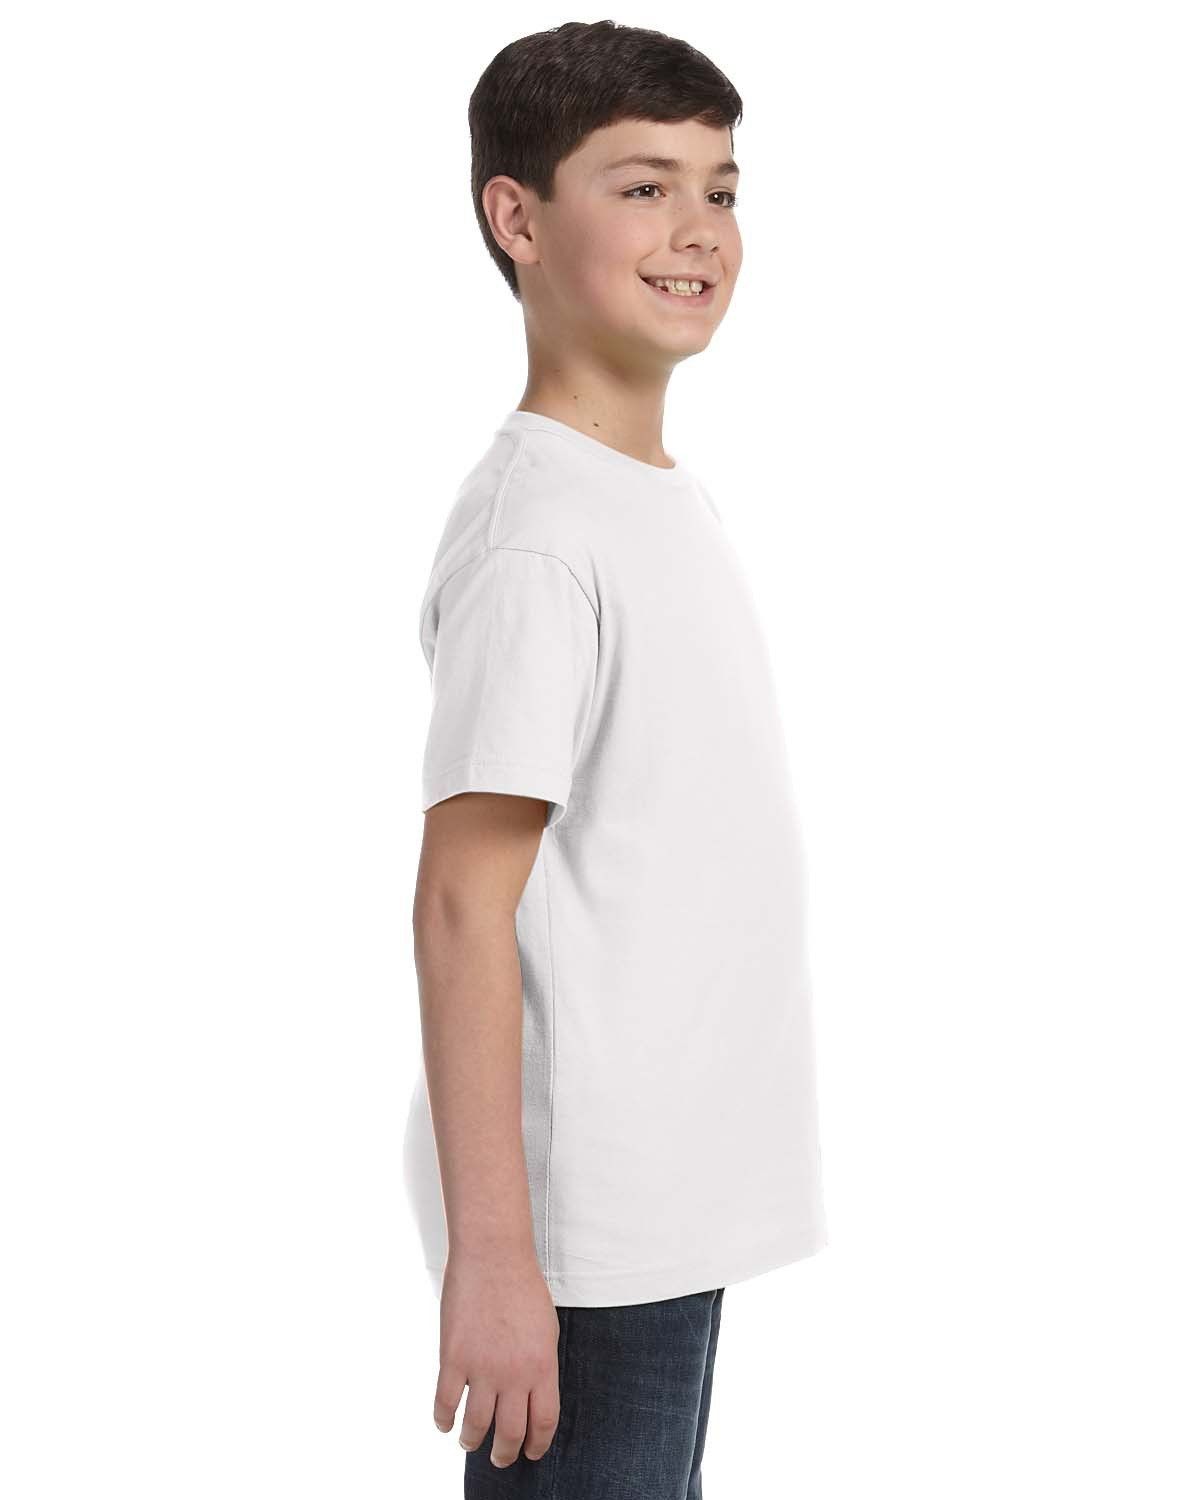 'LAT 6101 Youth Fine Jersey Tee'